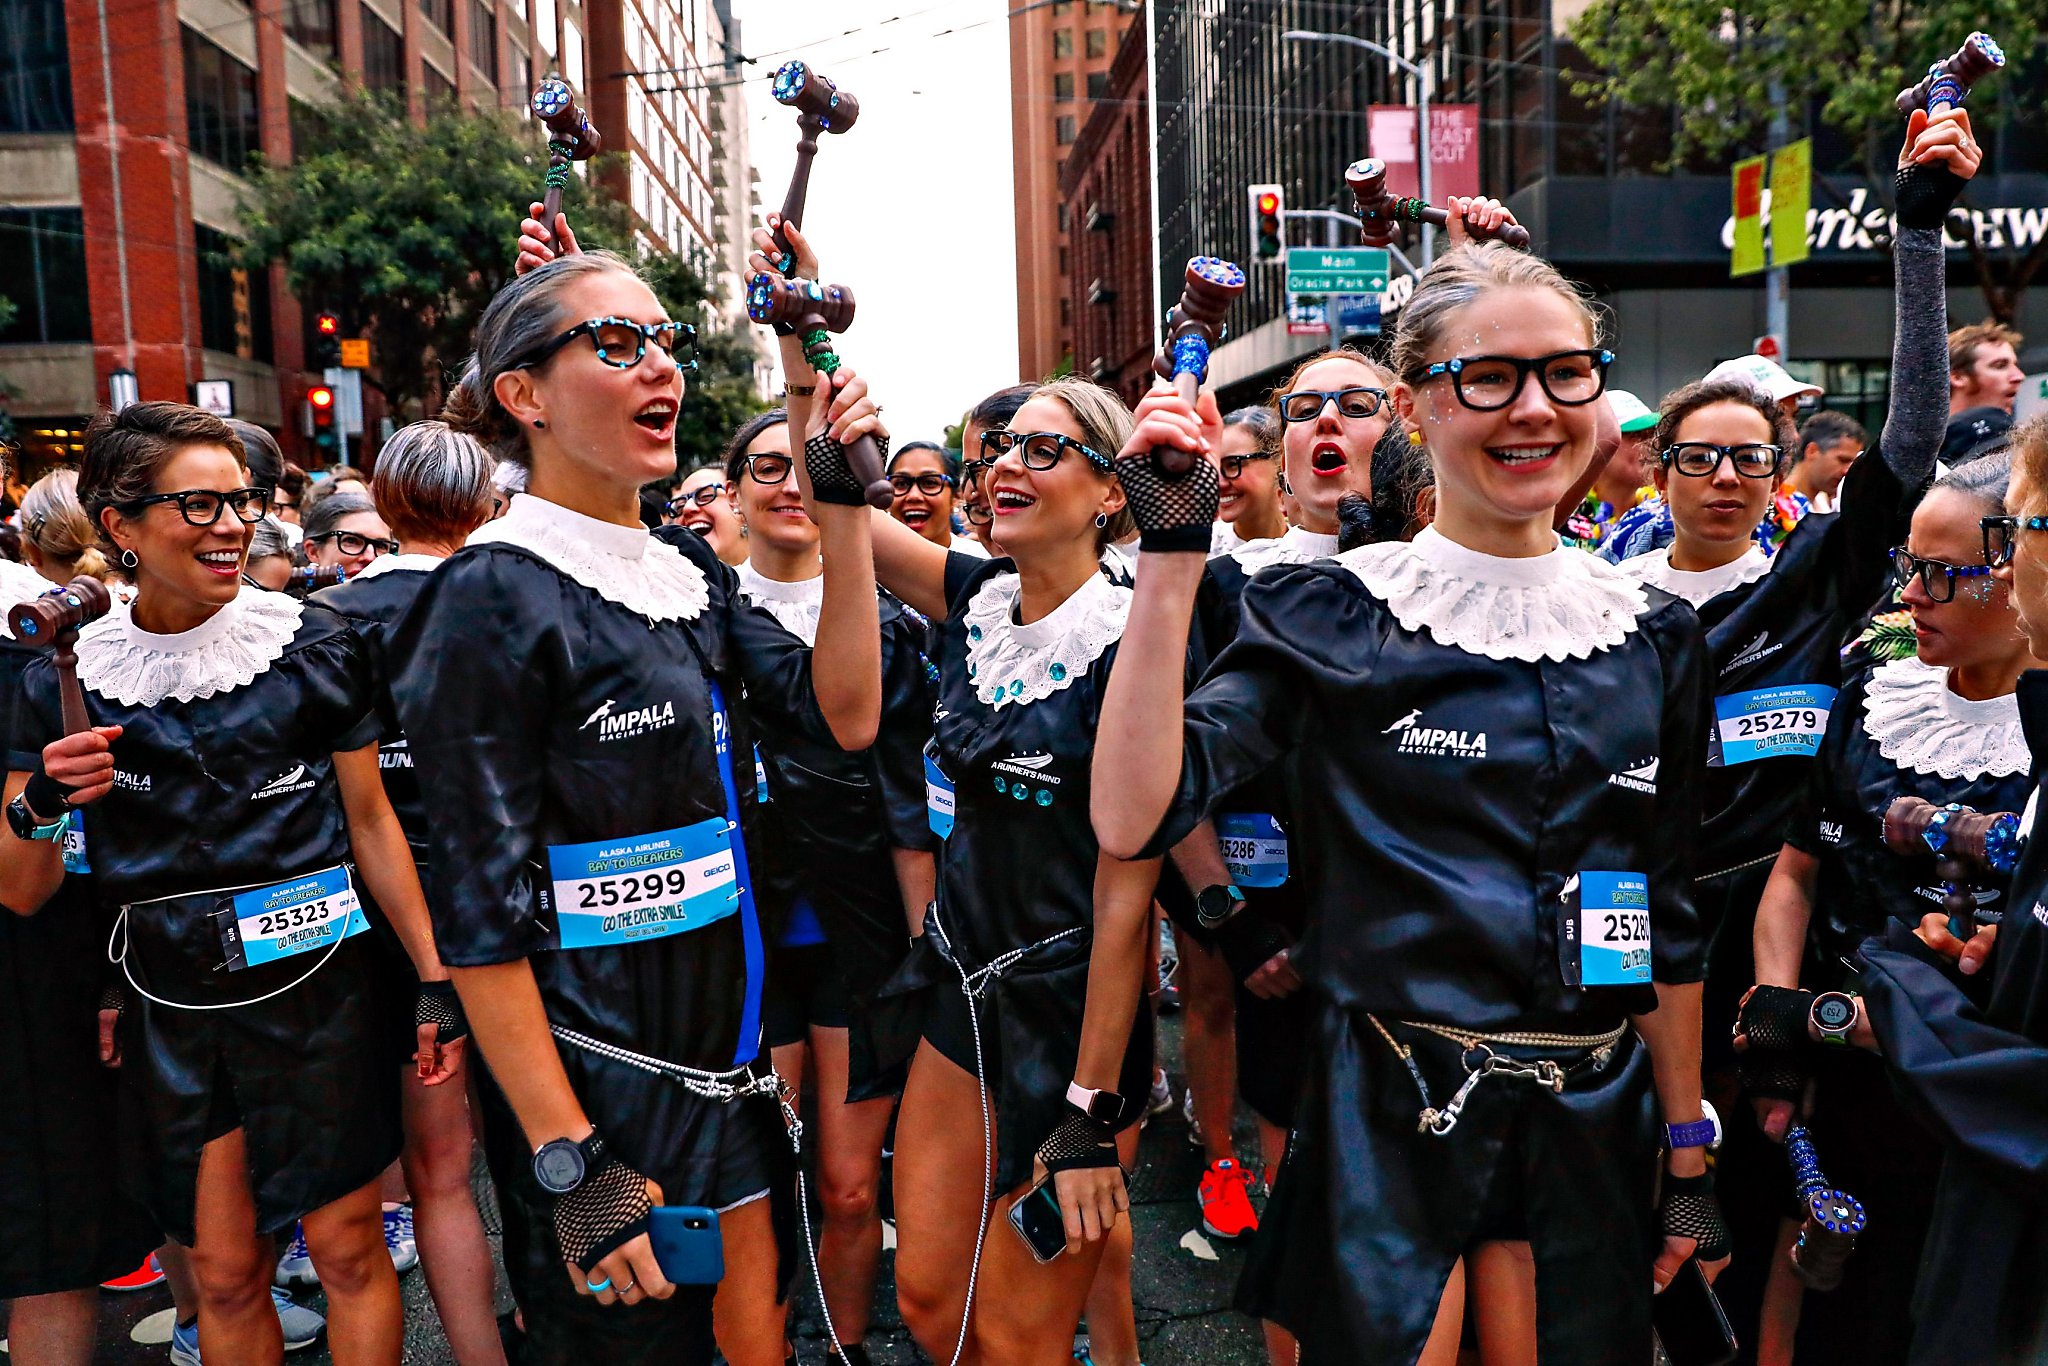 bay breakers race run costume canceled organizers tell ruth bader ginsburg dressed justice dance start